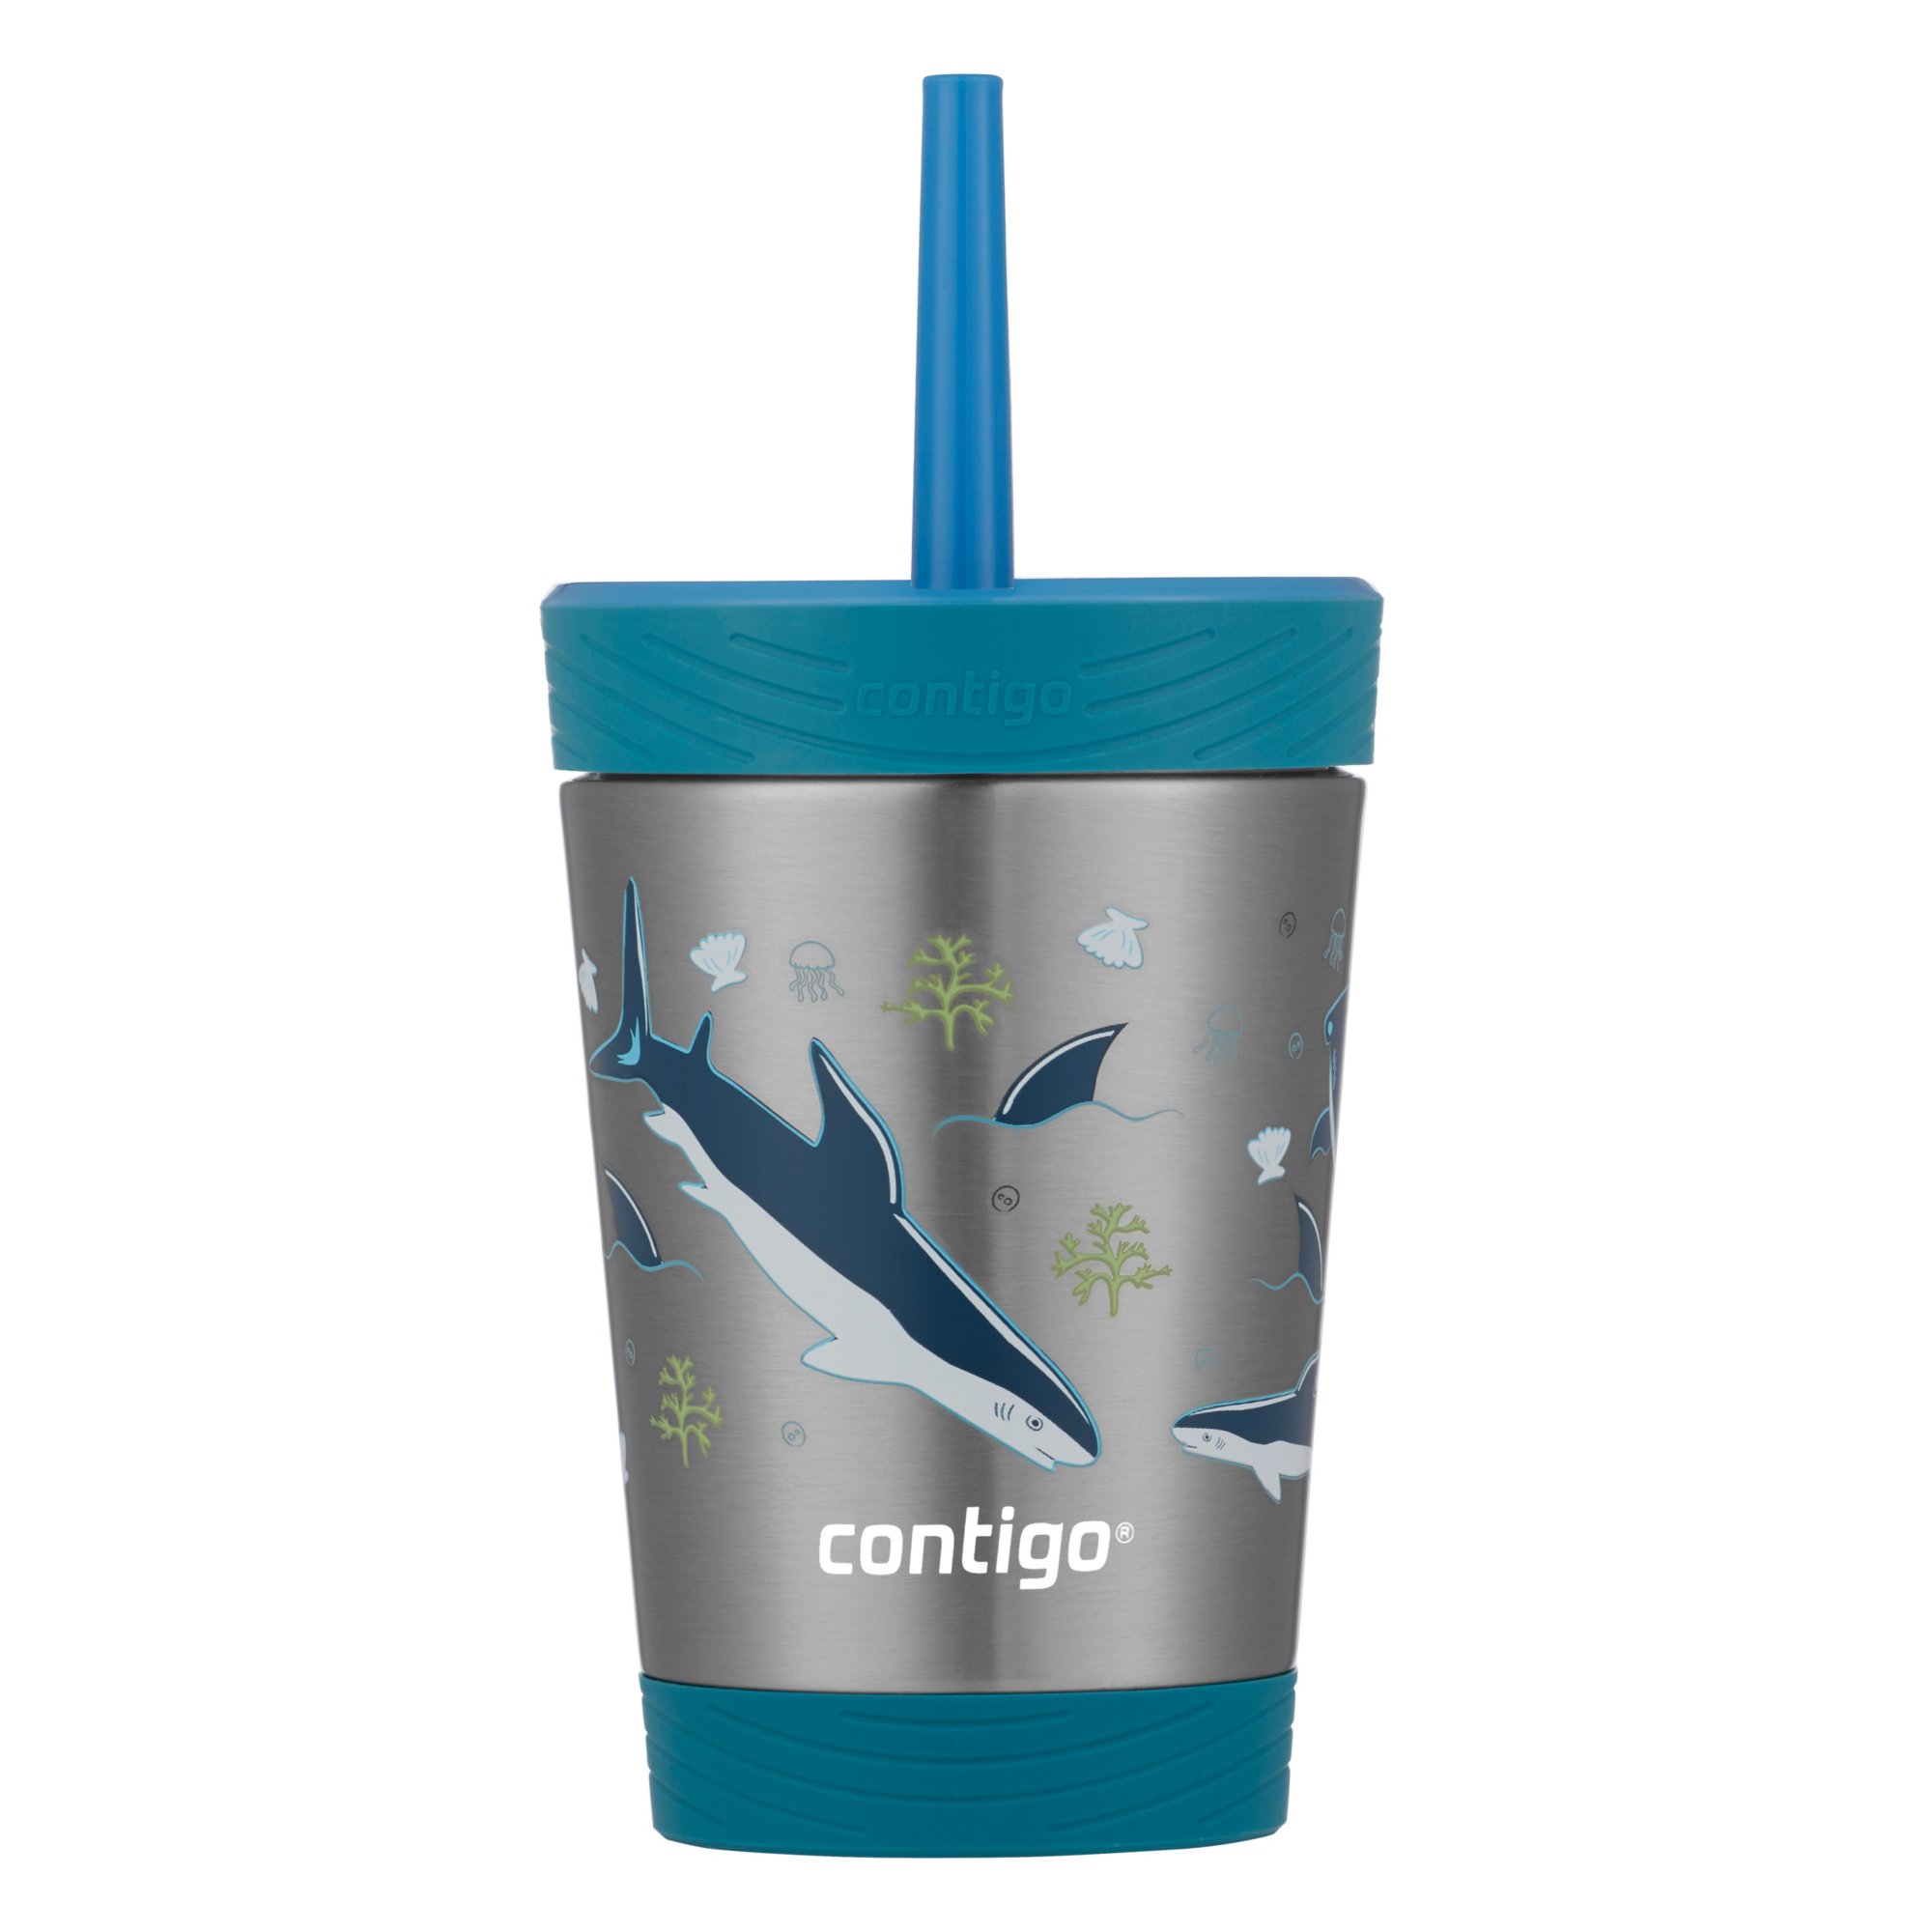 12oz Kids Toddler Straw Cup with Lids,Spill Proof children